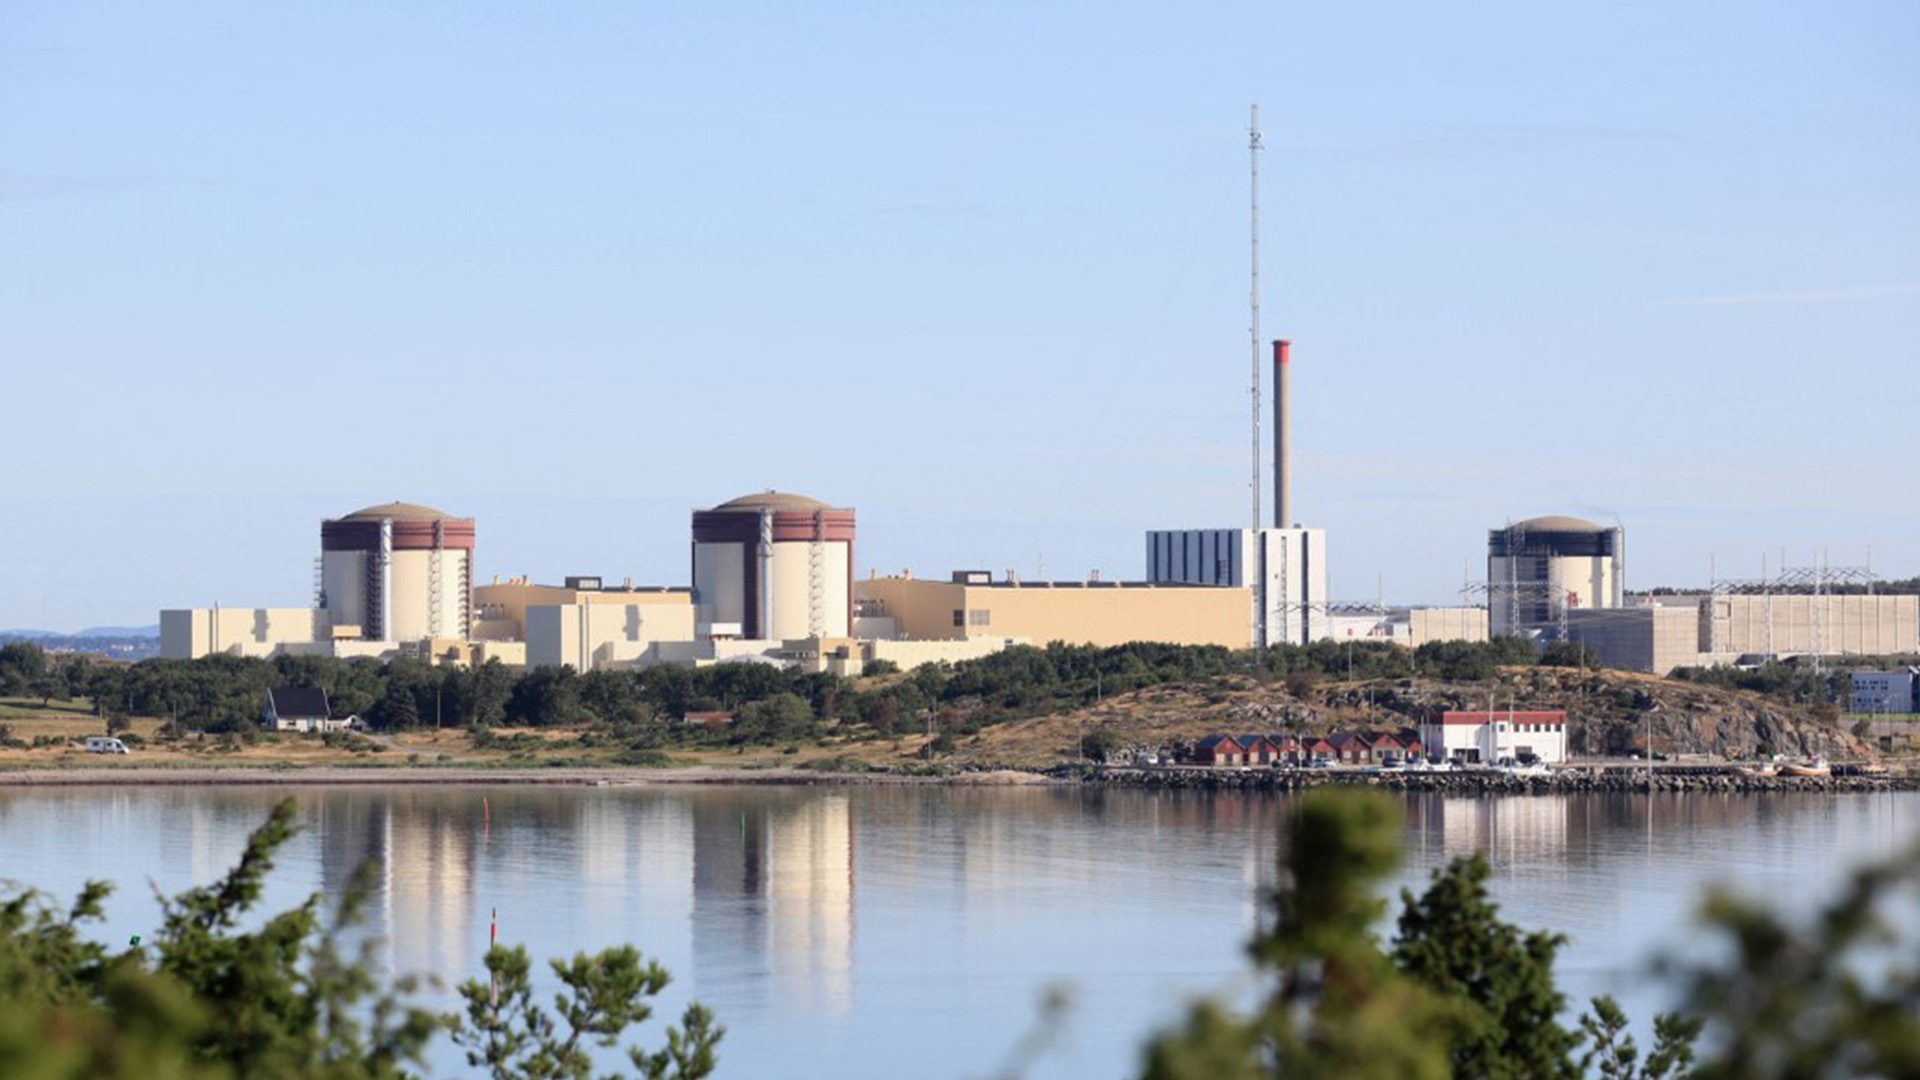 Vattenfall's Ringhals Nuclear Power Plant